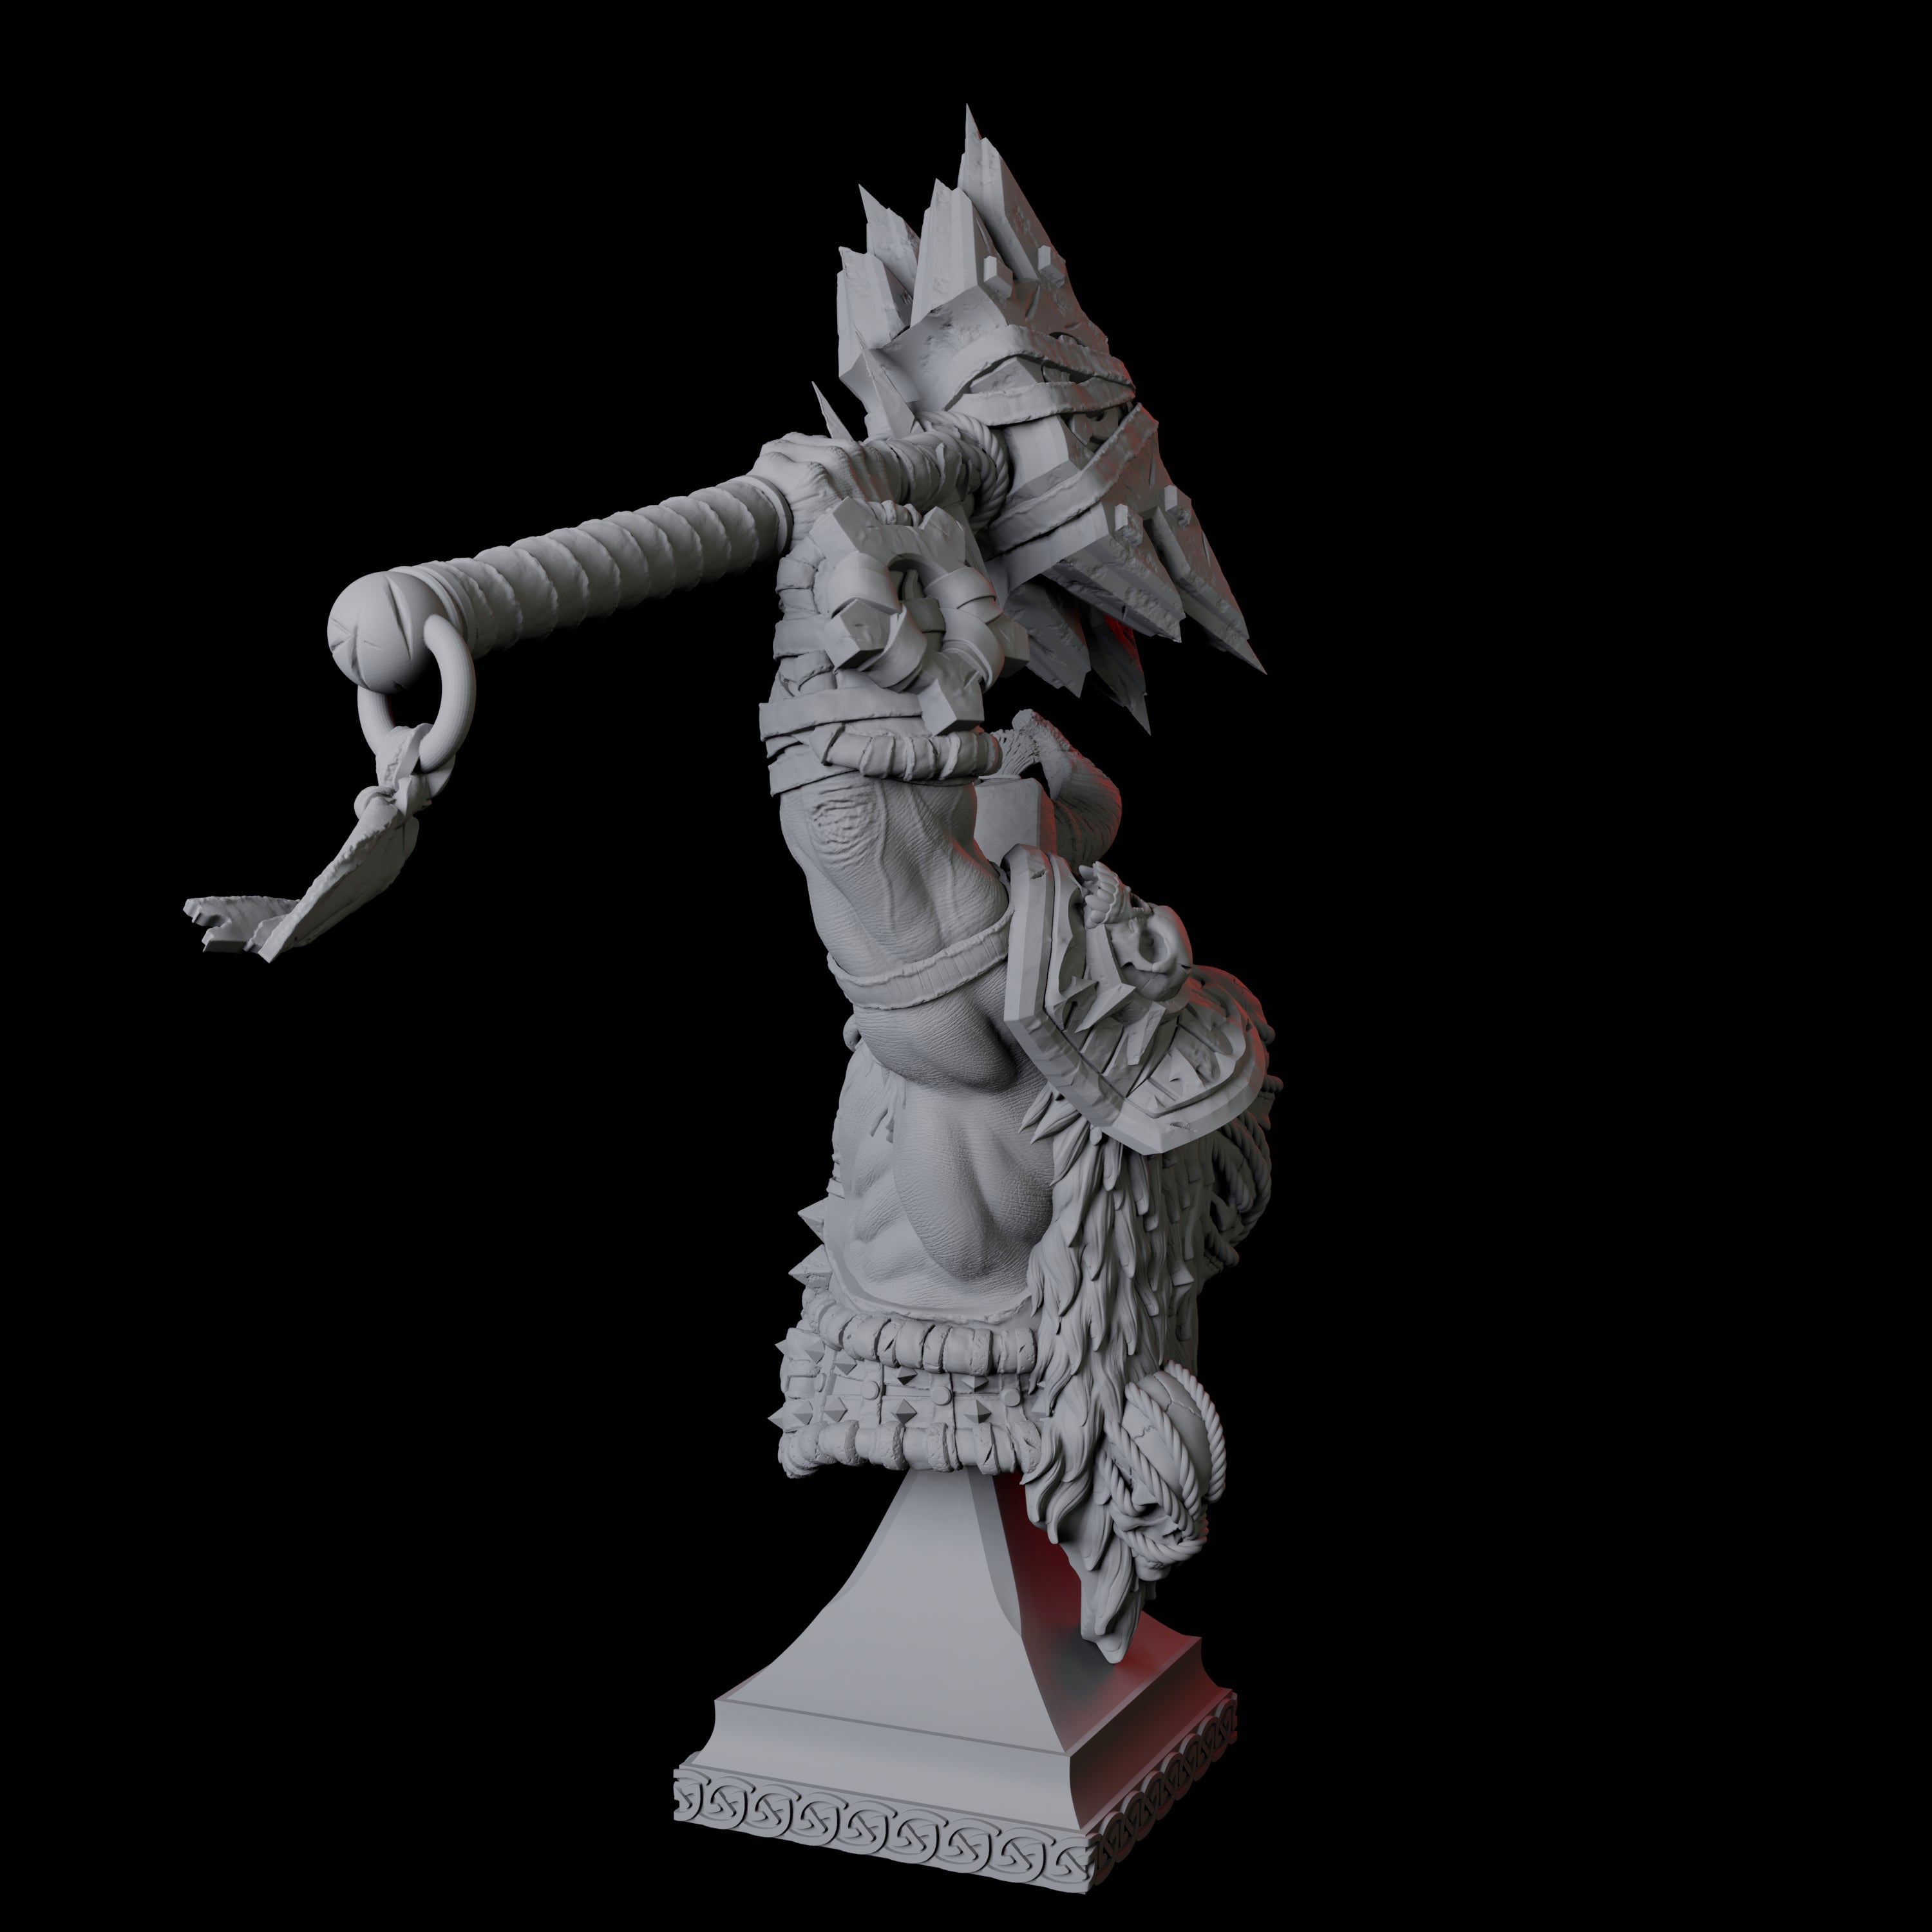 Barbarian Bust Miniature for Dungeons and Dragons